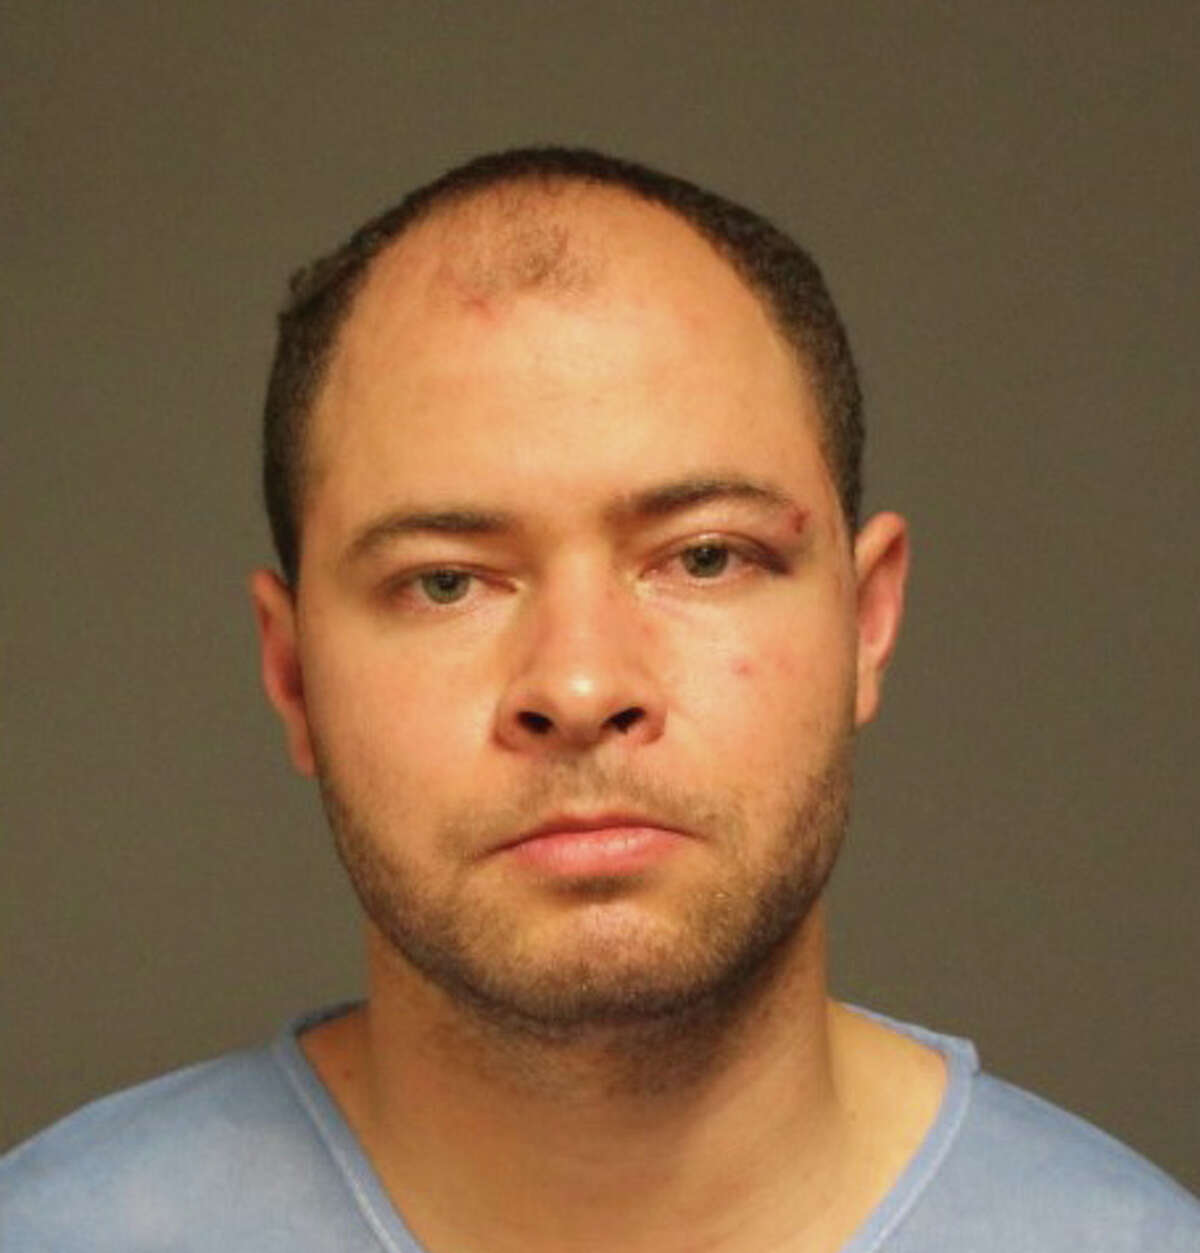 Daniel Silva, of Bridgeport, was charged with first-degree assault for allegedly stabbing a bouncer in the face at a local bar.